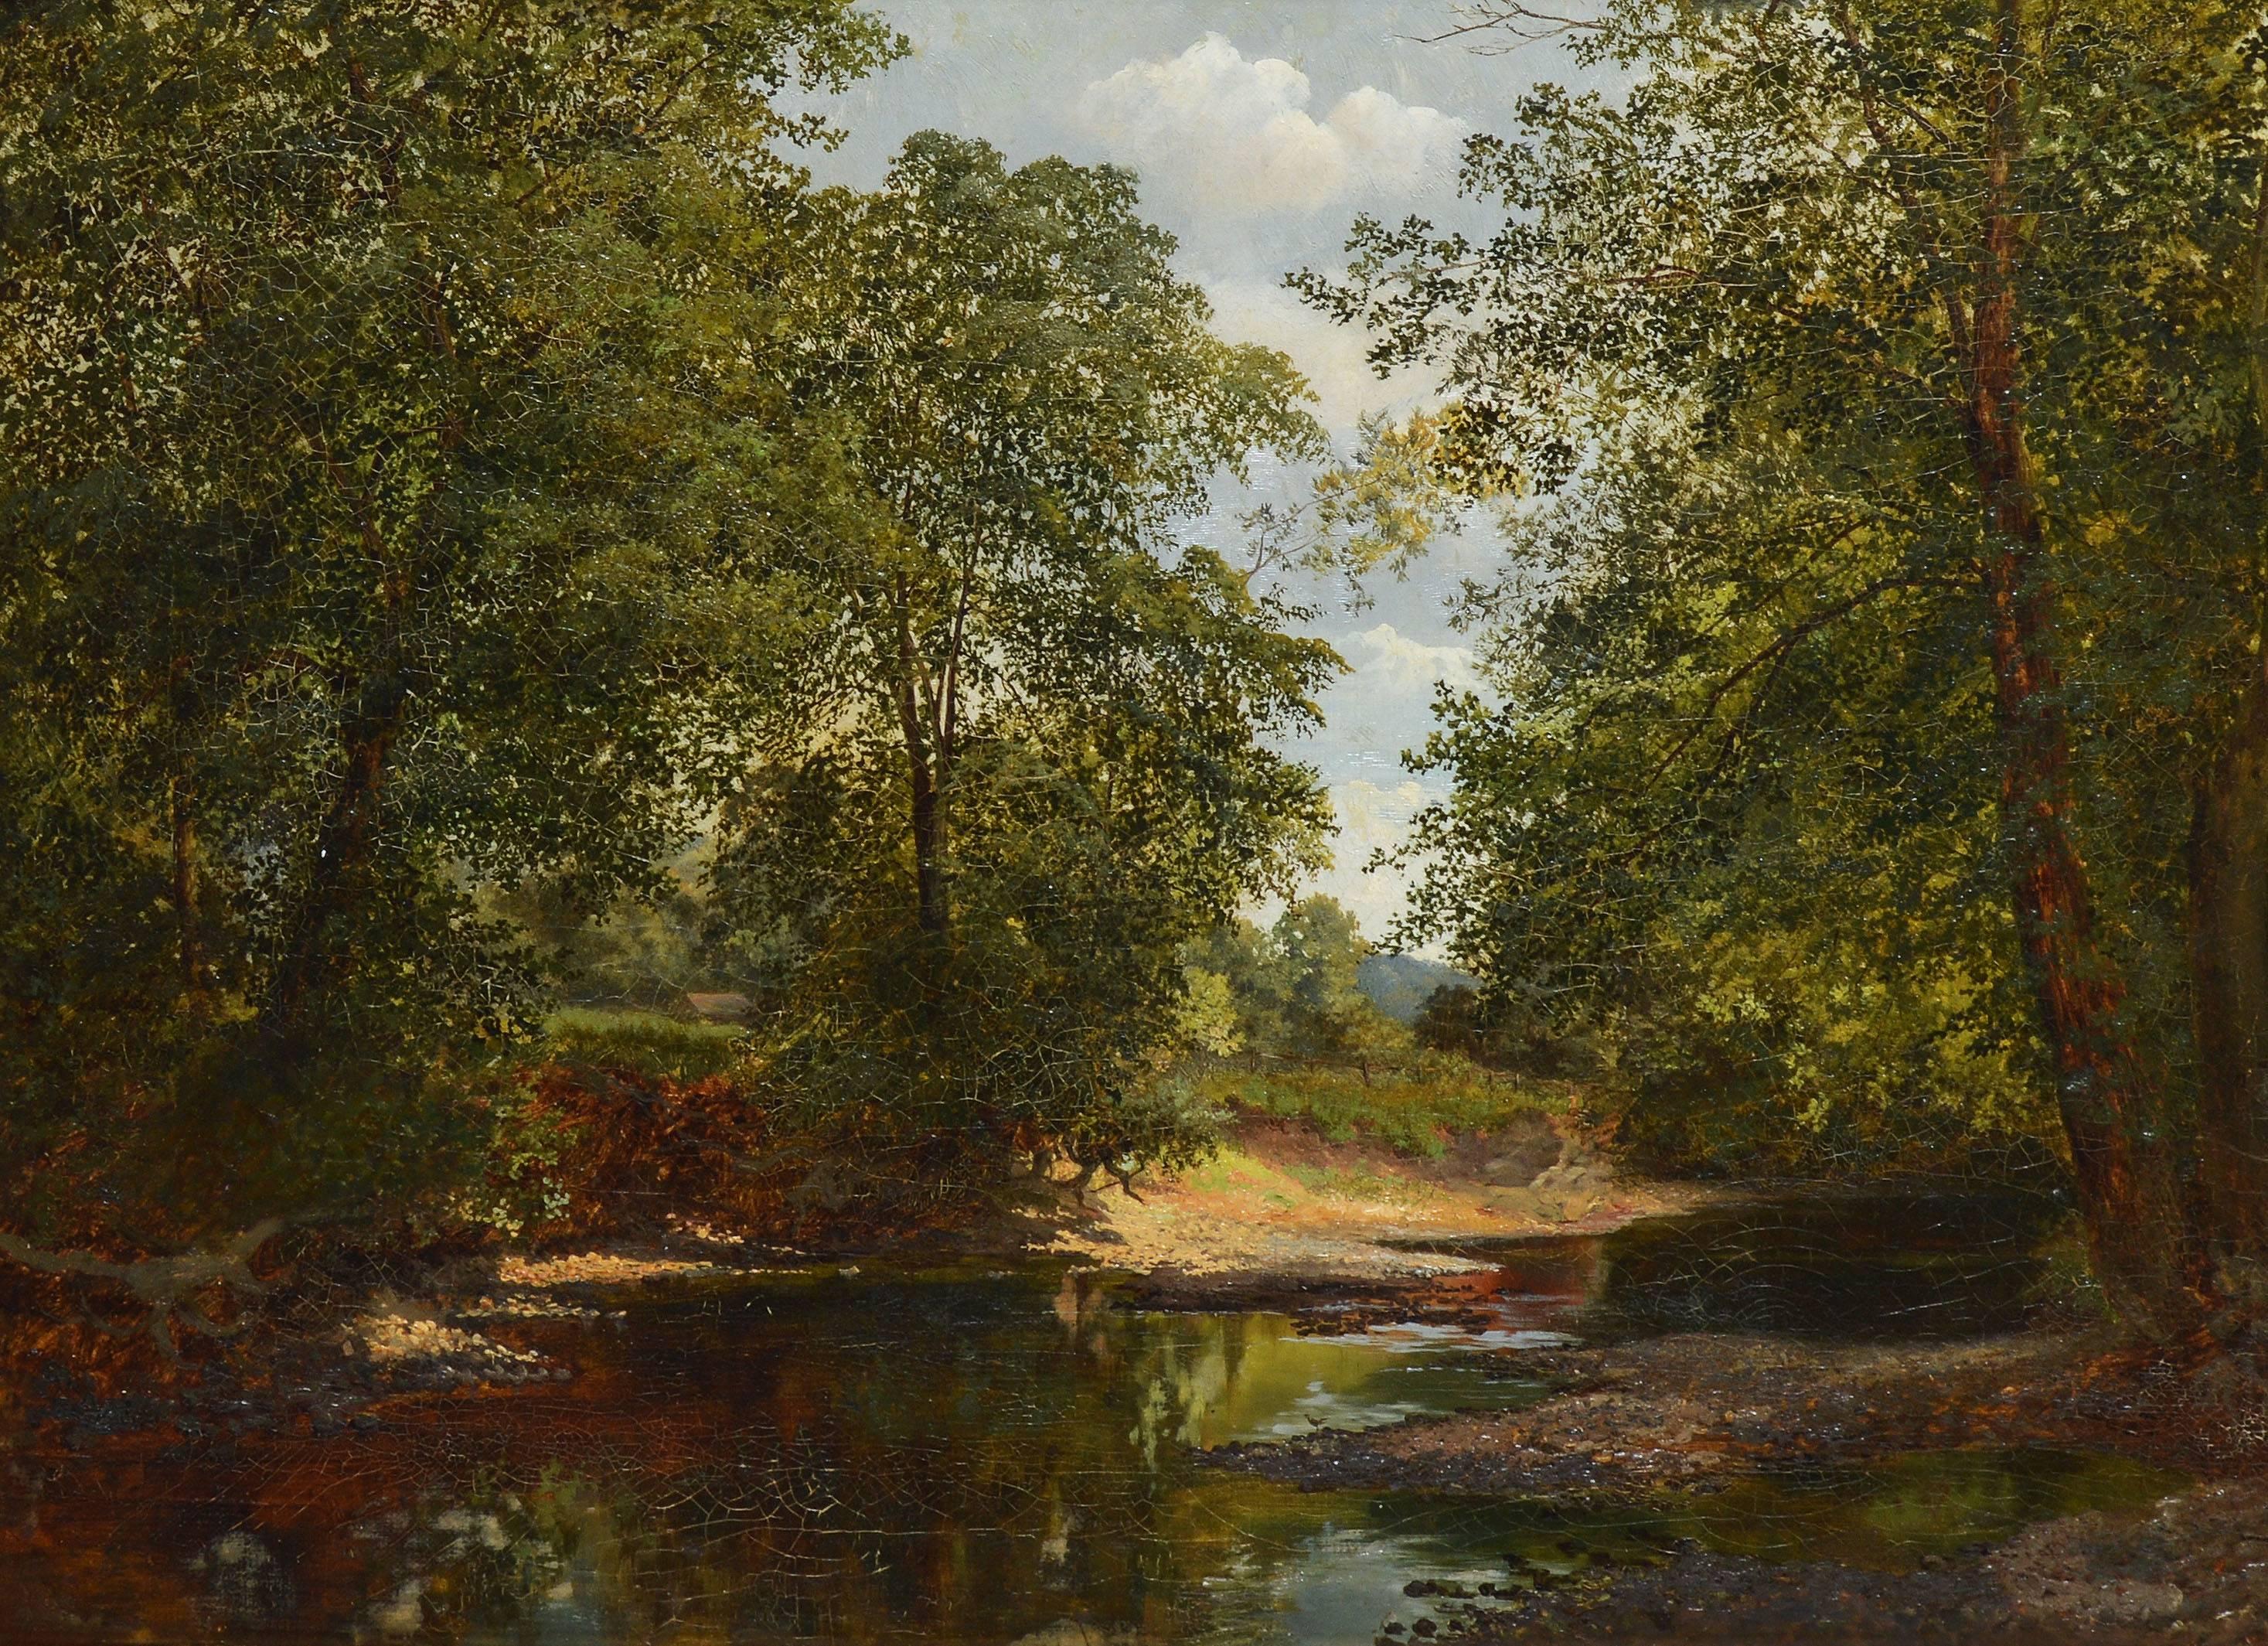 Barbizon school landscape painting by George Stanfield Walters  (1838 - 1924).  Oil on canvas, circa 1875.  Signed and dated lower right, 